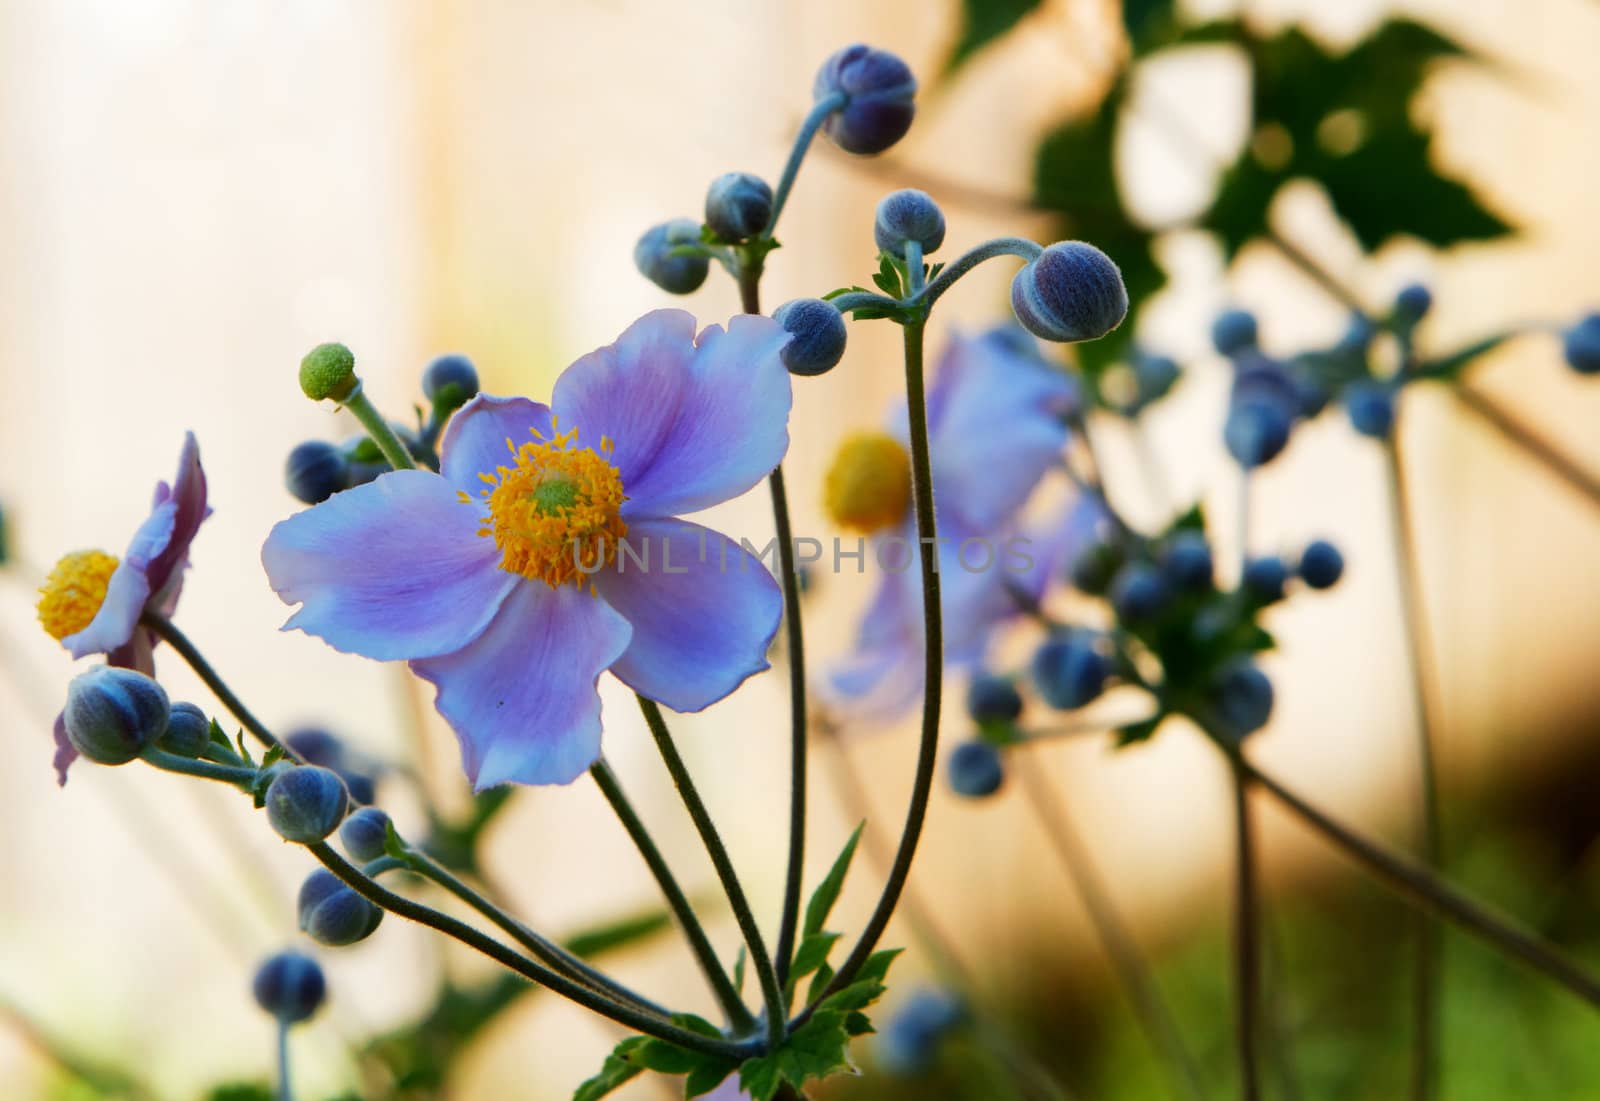 Single Violet and gold Japanese anemone with soft focus plants in background